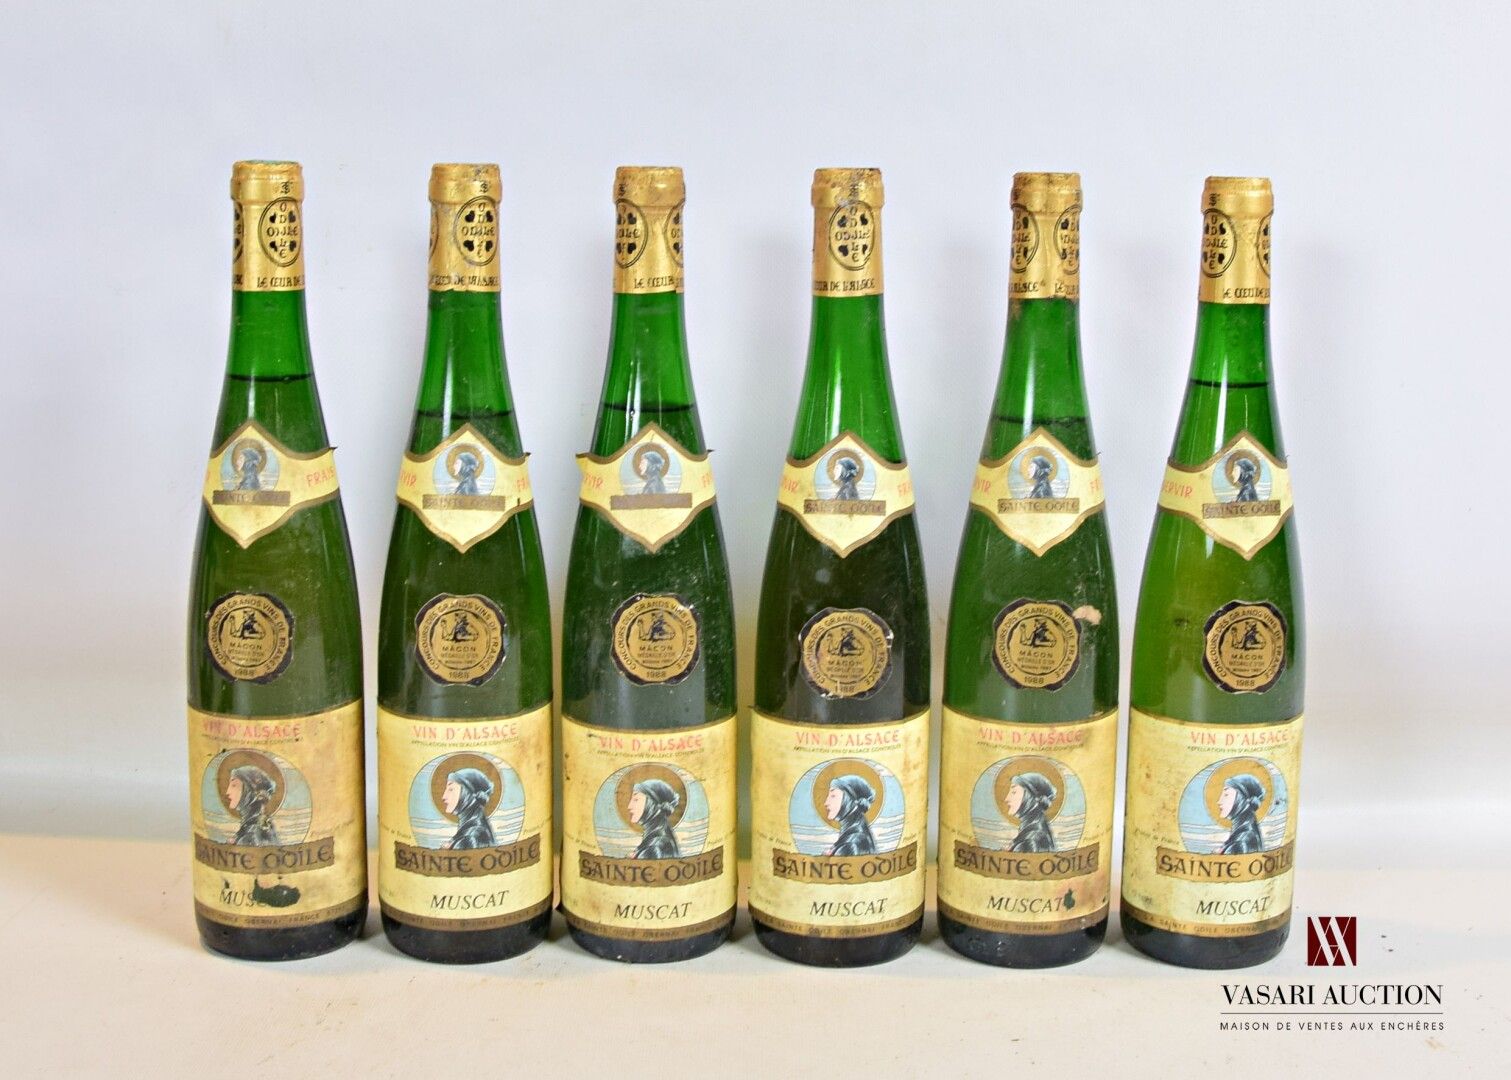 Null 6 Flaschen MUSCAT d'Alsace mise Ste Odile 1988

	Goldmedaille in Macon. Ver&hellip;